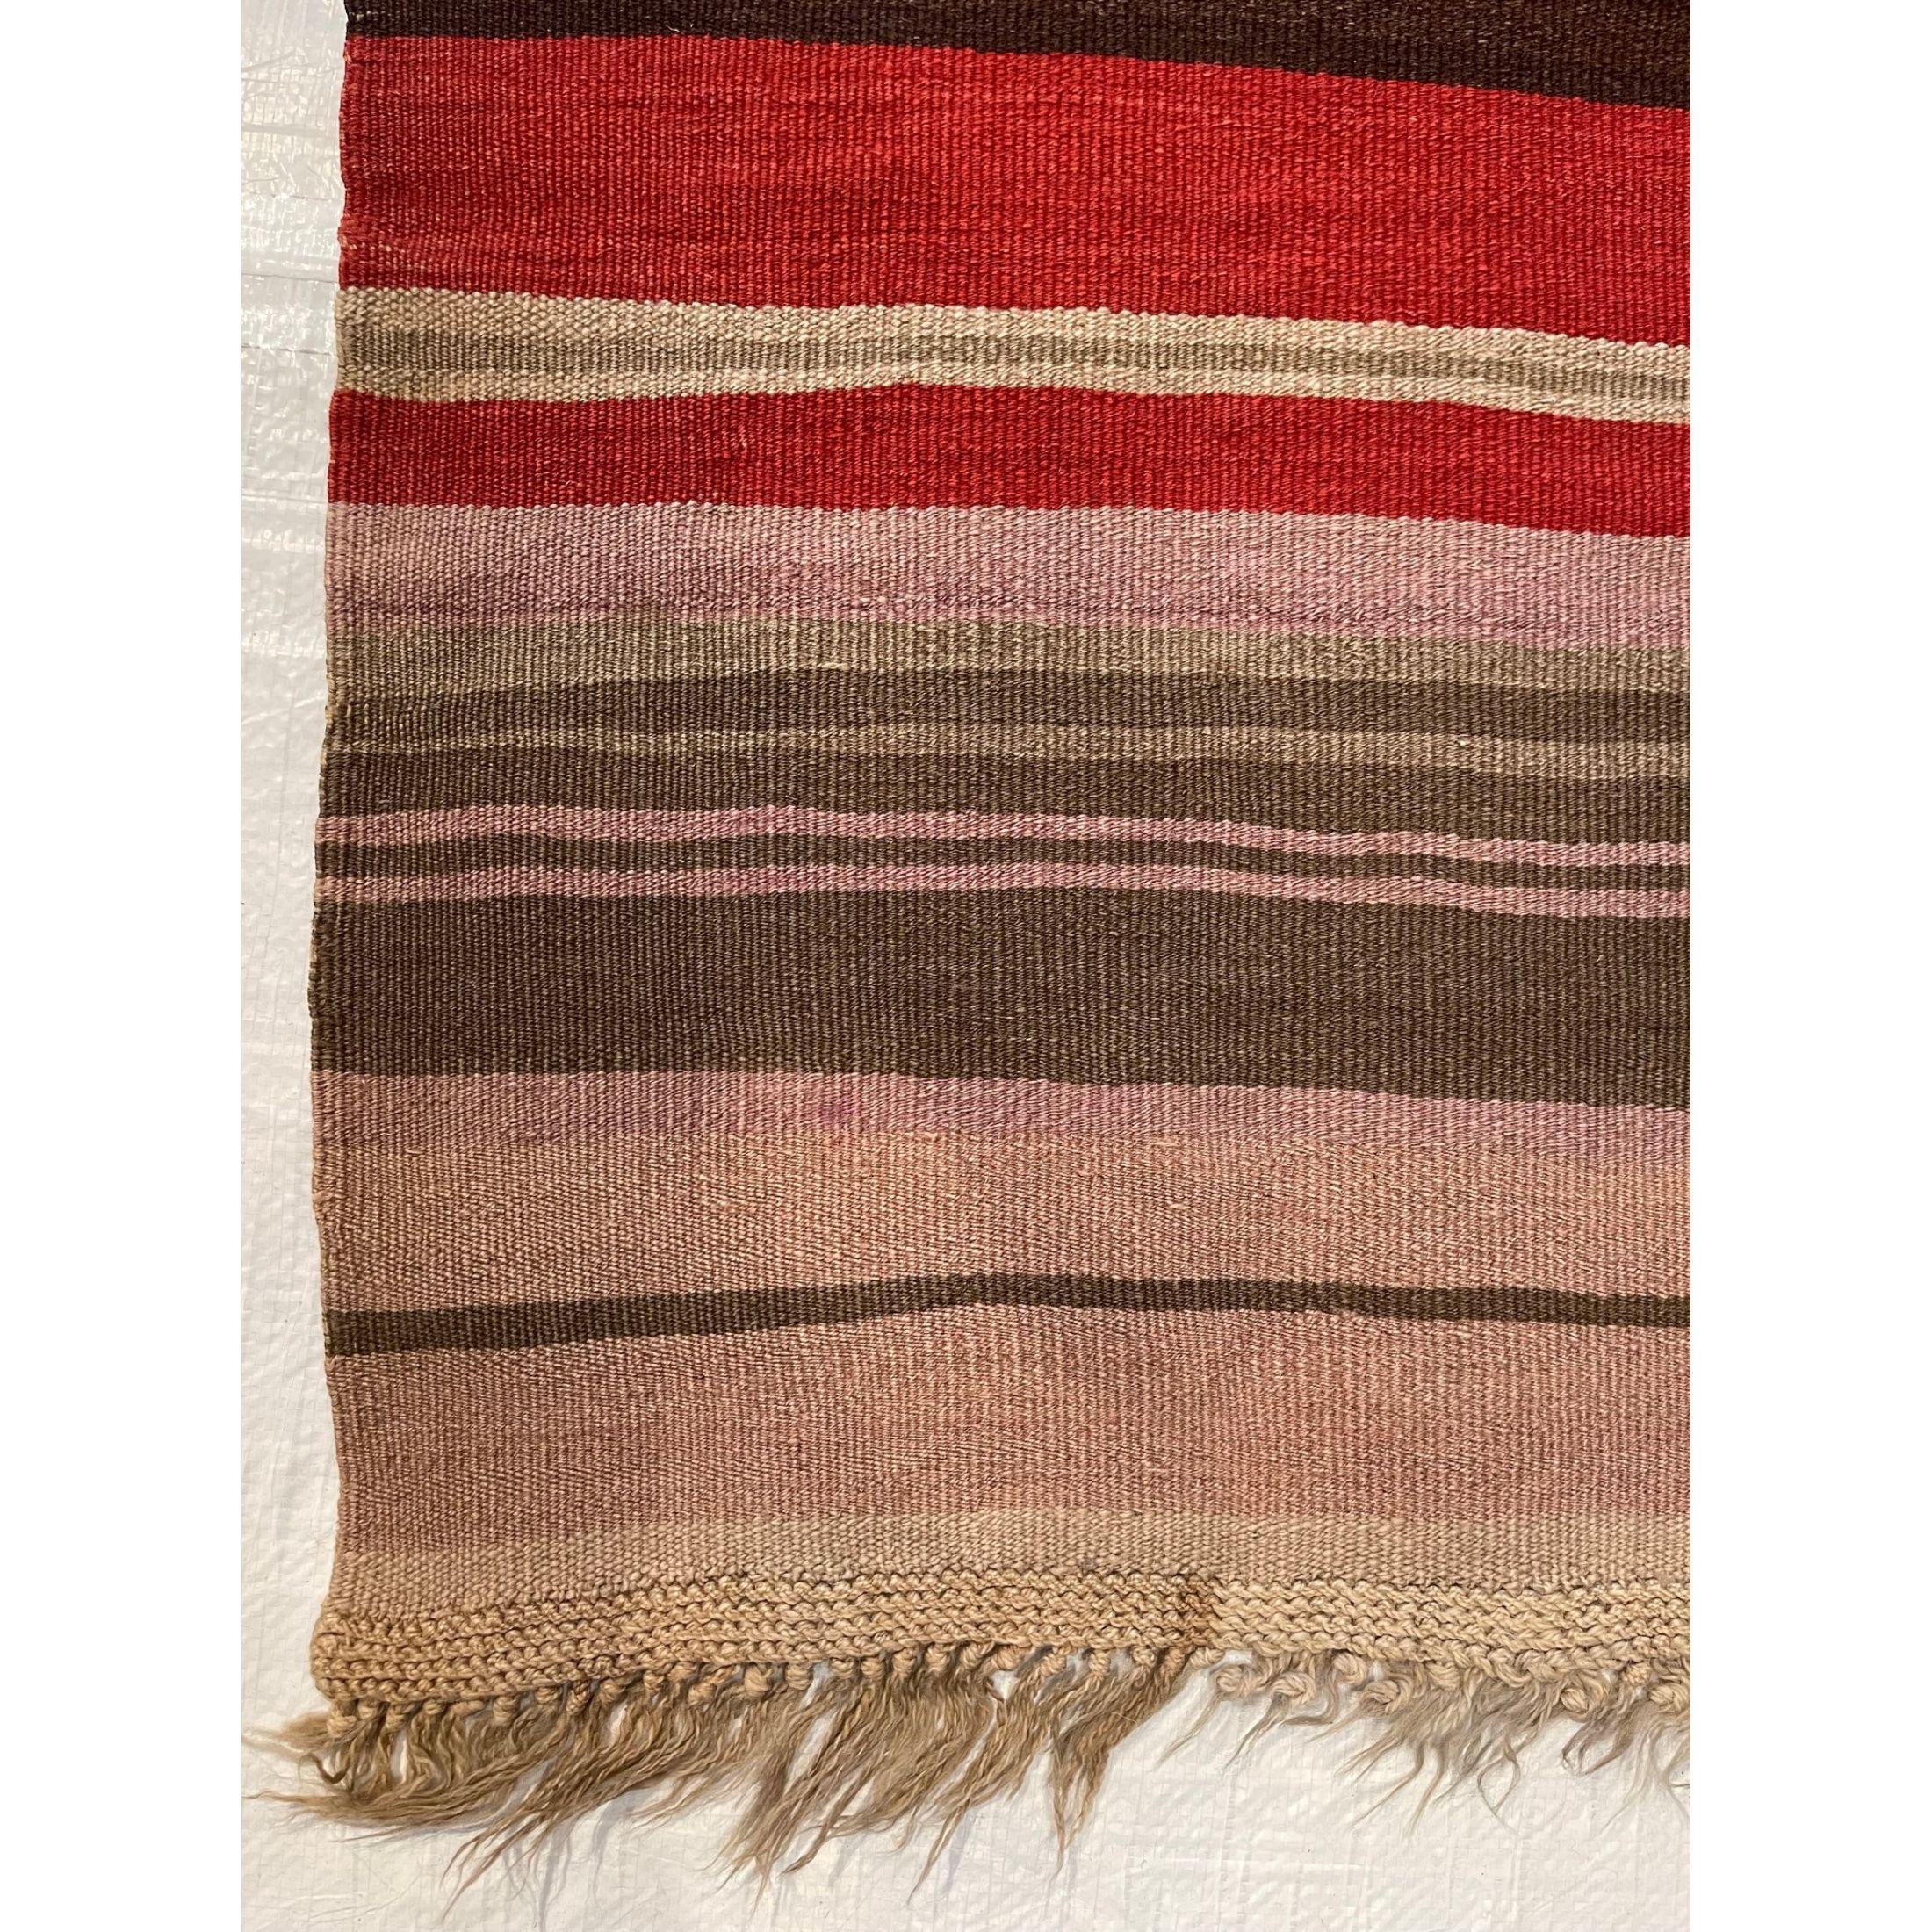 Other Early 20th Century Vintage Flat Weave Shahsavand Kilim Rug For Sale